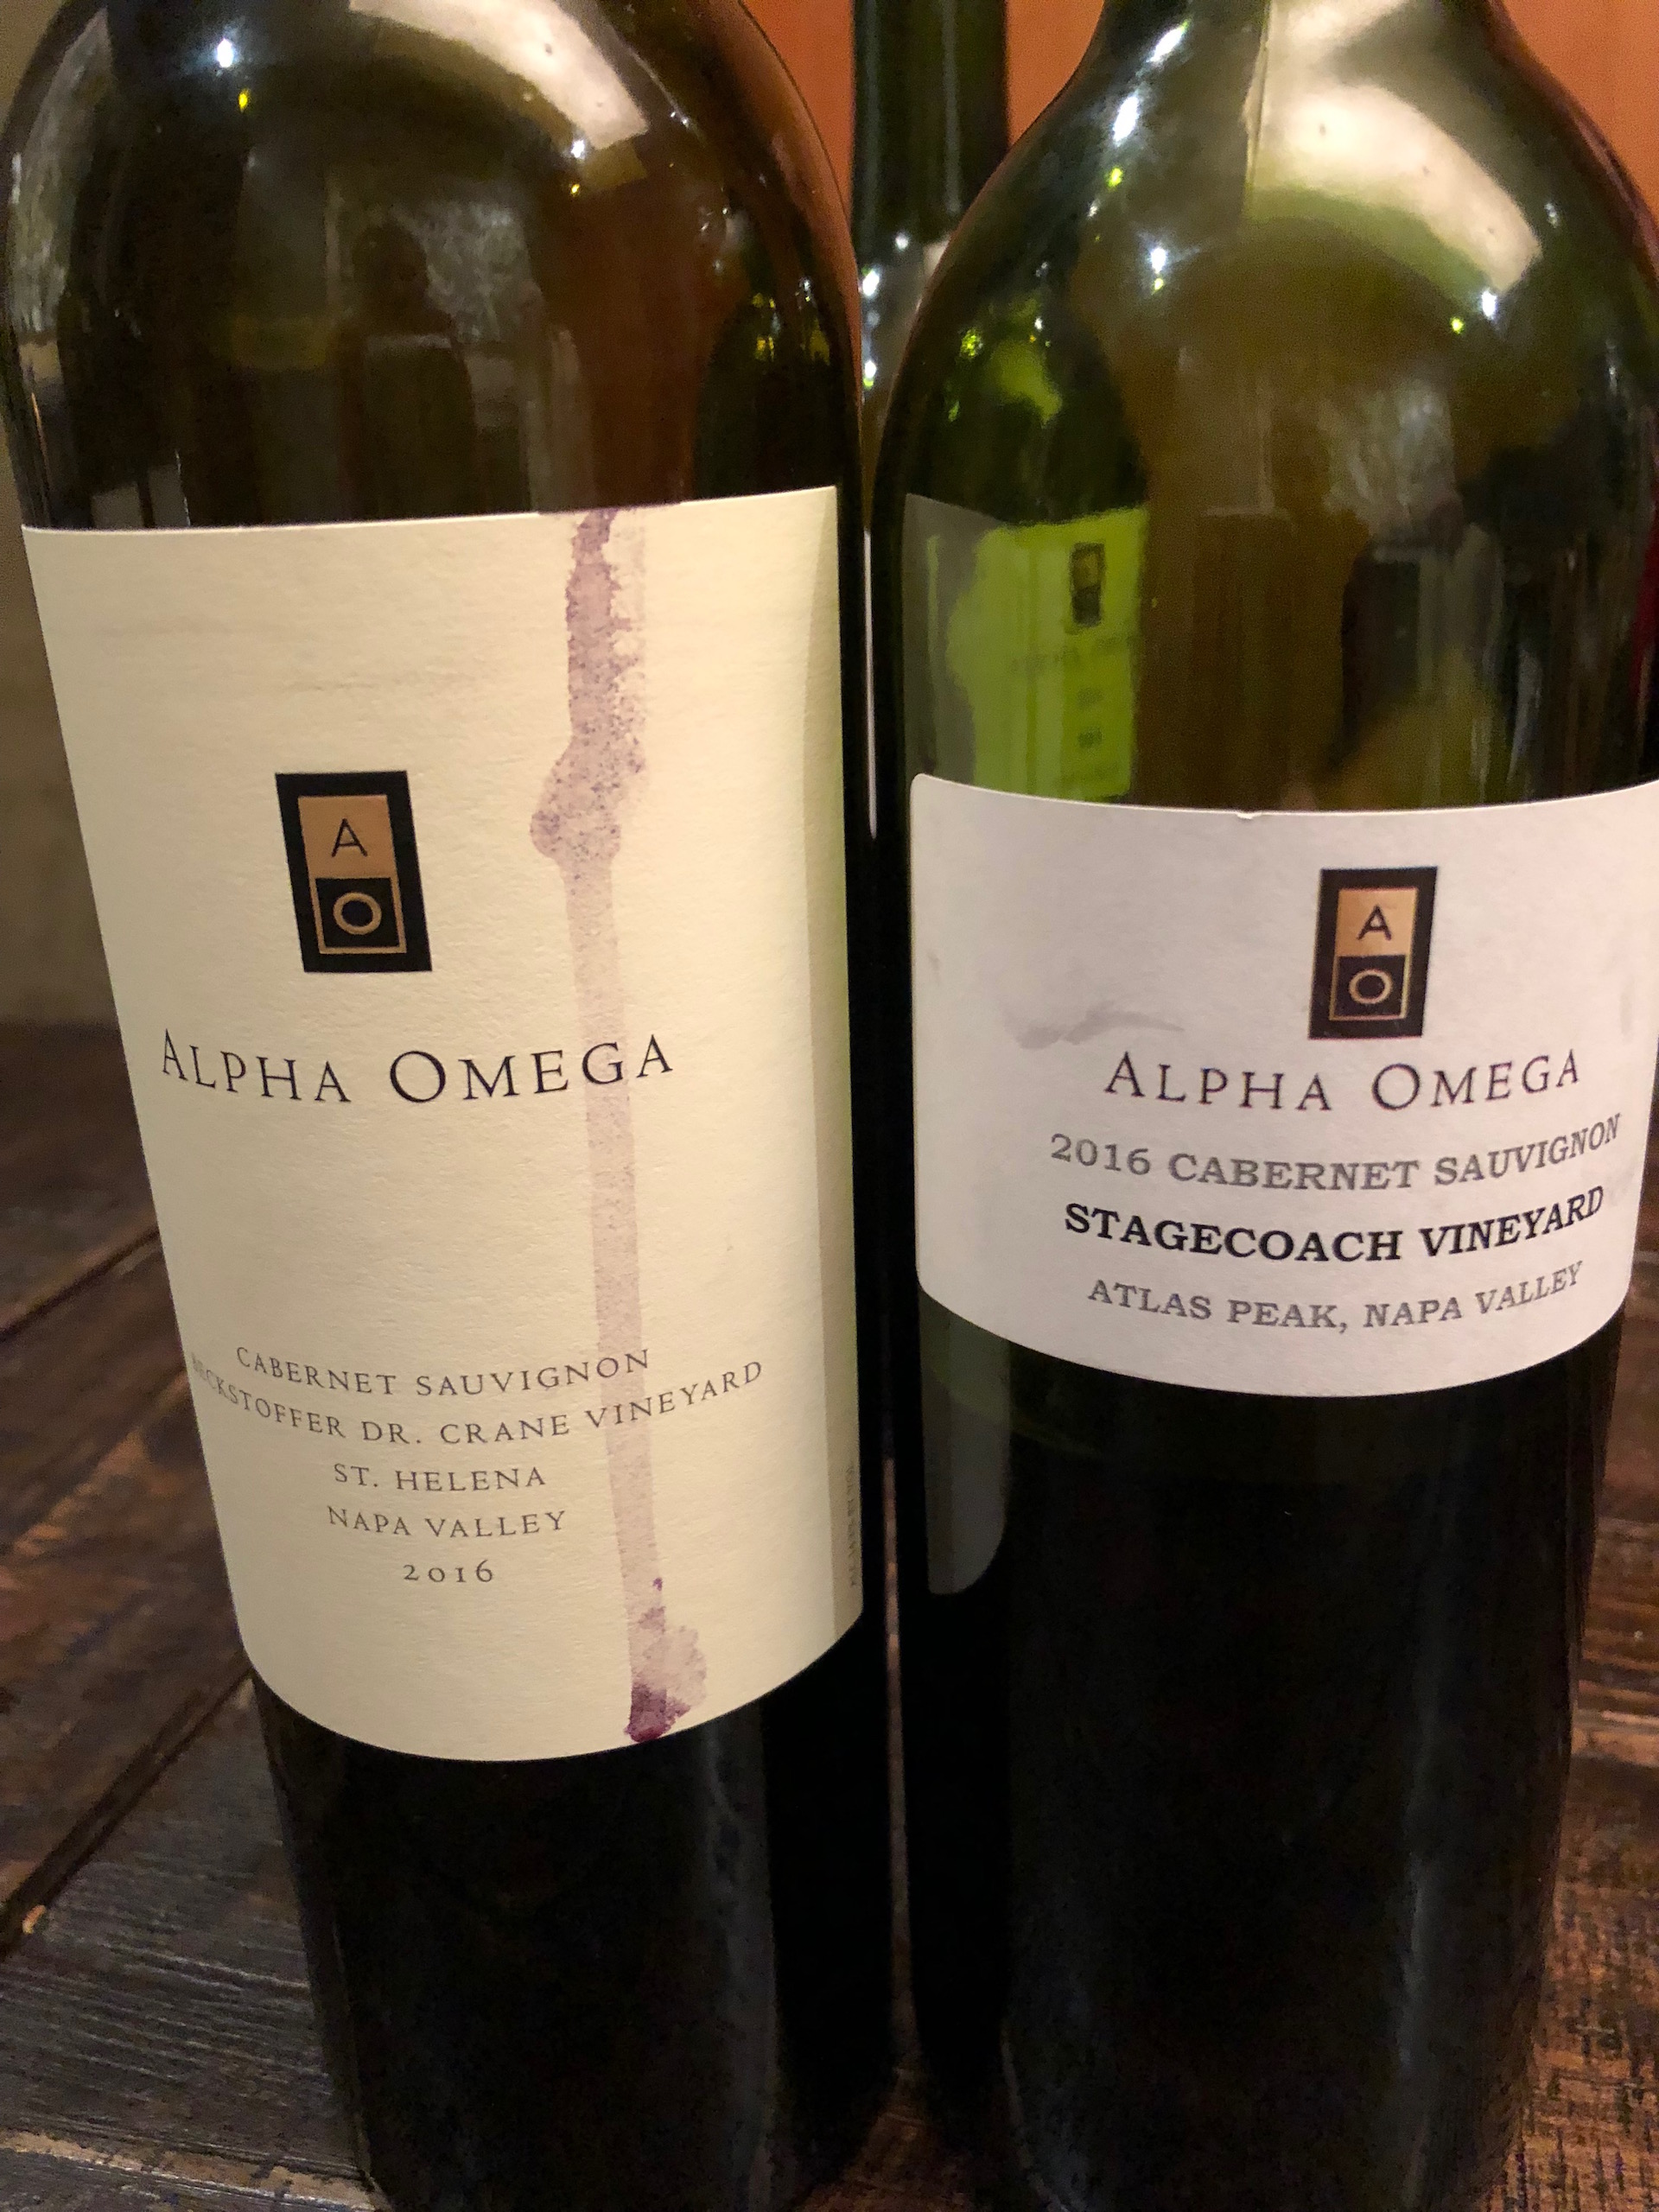 Two of the Napa Valley’s most iconic vineyards, Beckstoffer Dr. Crane and Stagecoach, are sources for Alpha Omega Cabernet Sauvignon